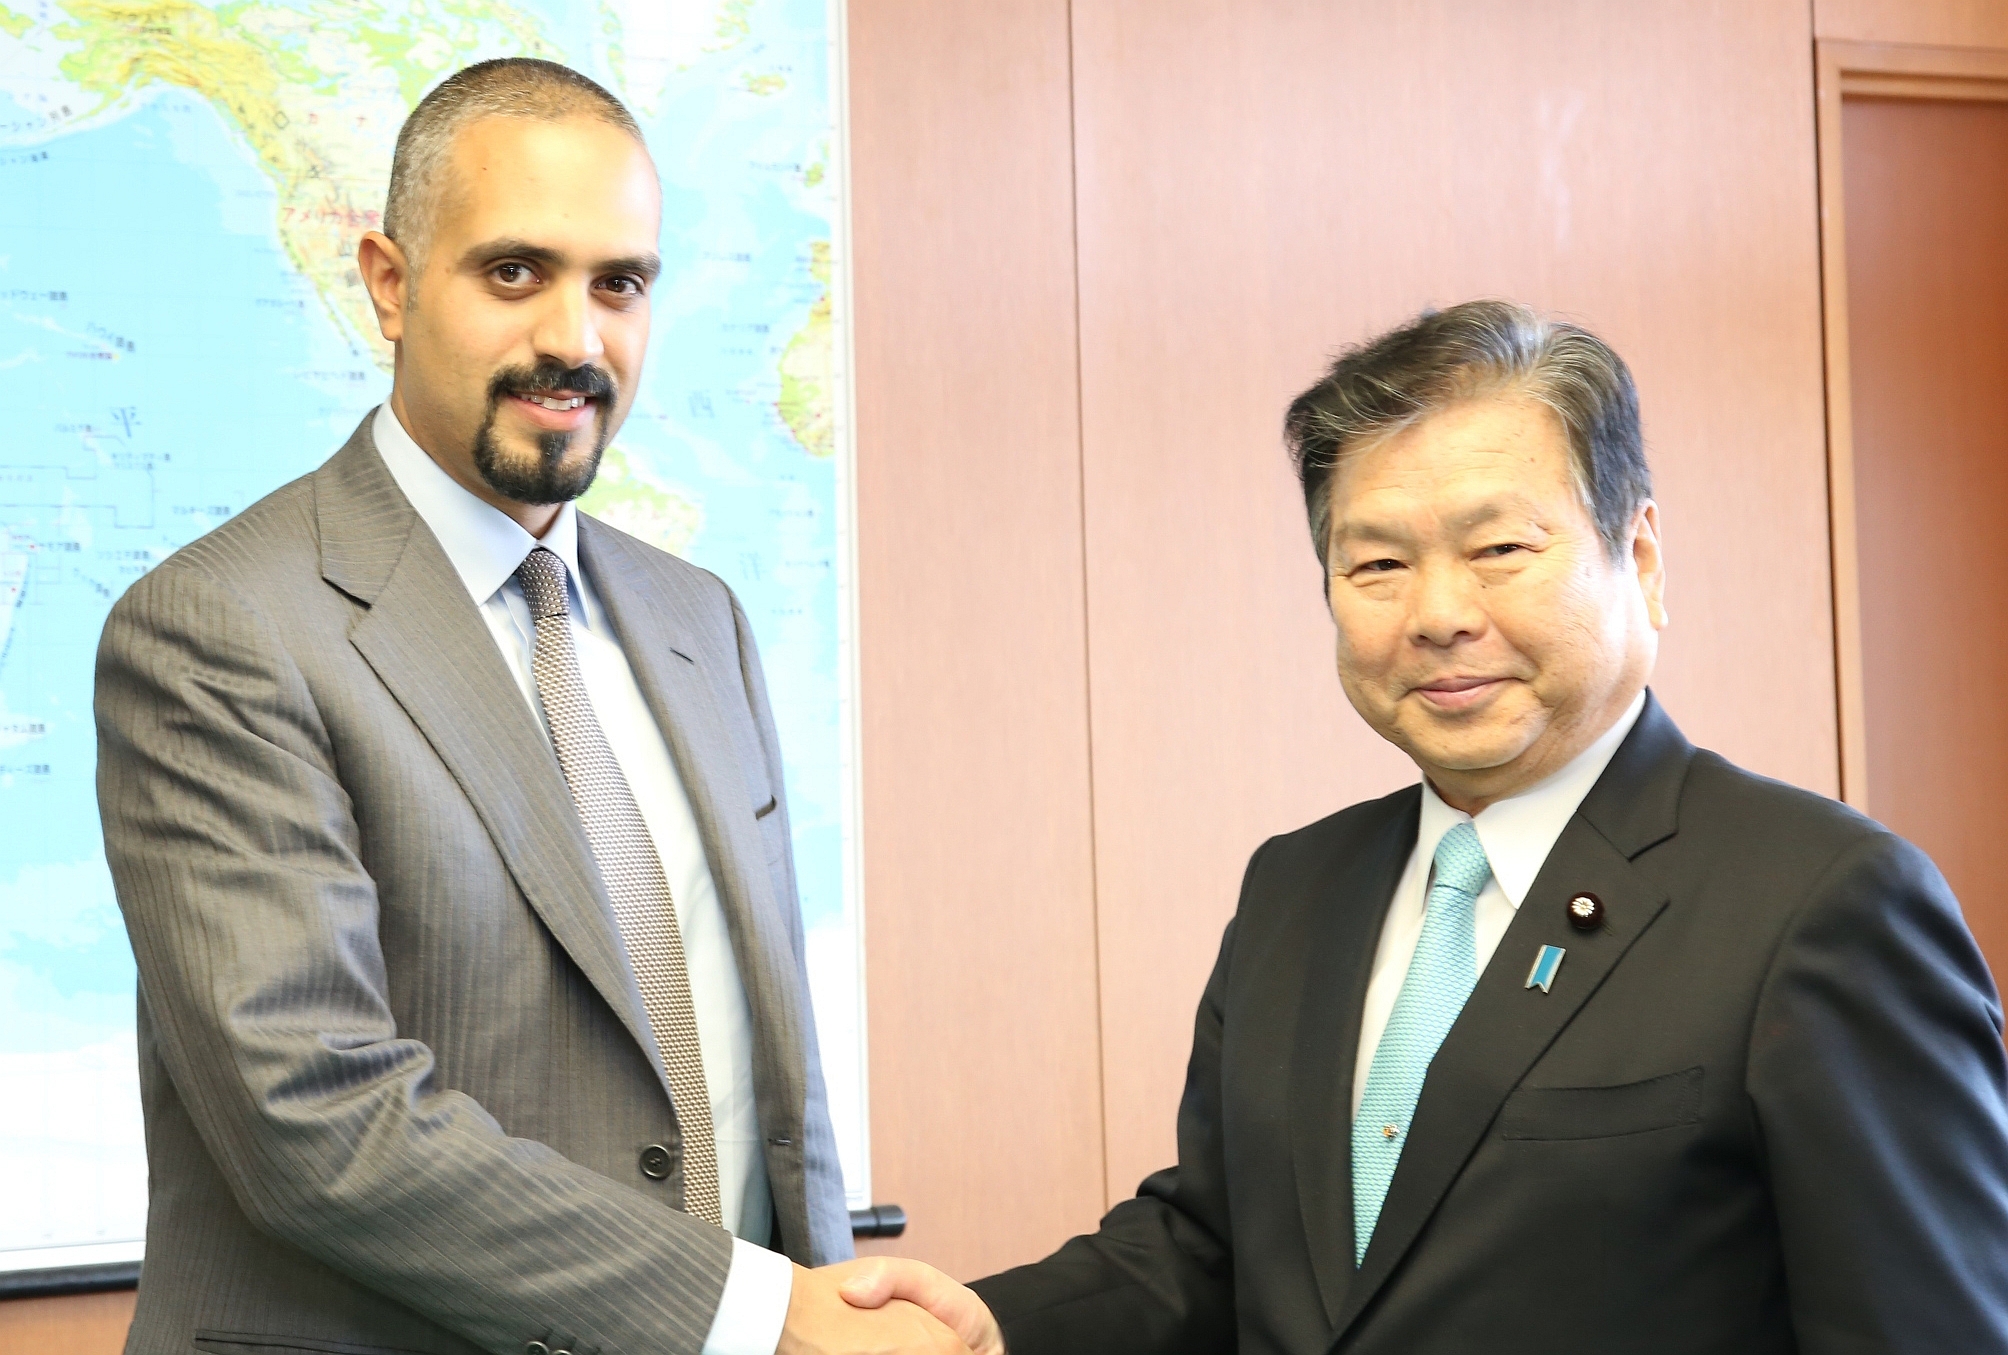 Director-General of the Kuwait Direct Investment Promotion Authority (KDIPA) Sheikh Dr. Meshaal Jaber Al-Ahmad Al-Sabah with State Minister of Land, Infrastructure, Transport and Tourism Issei Kitagawa